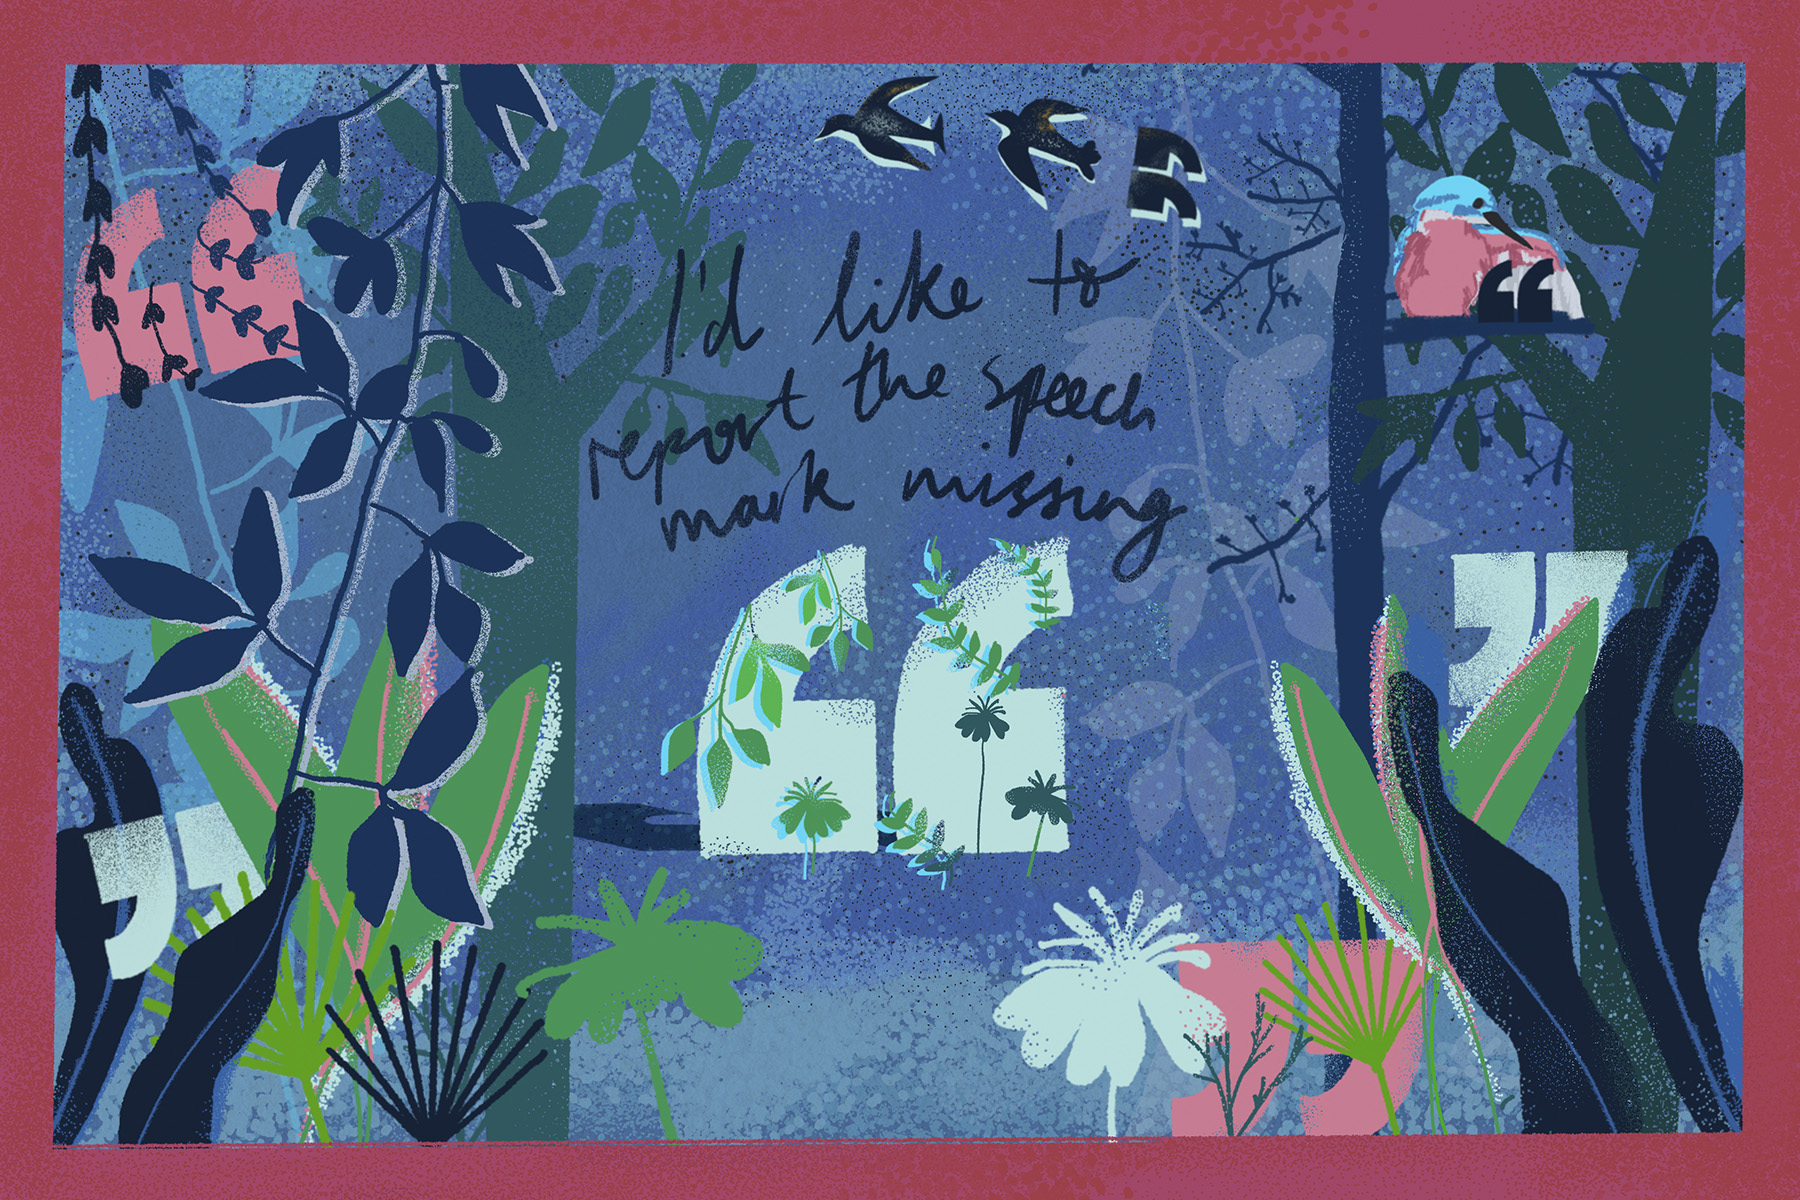 An illustration of a speech mark lost in the jungle, with a written caption reading "I'd like to report the speech mark missing"